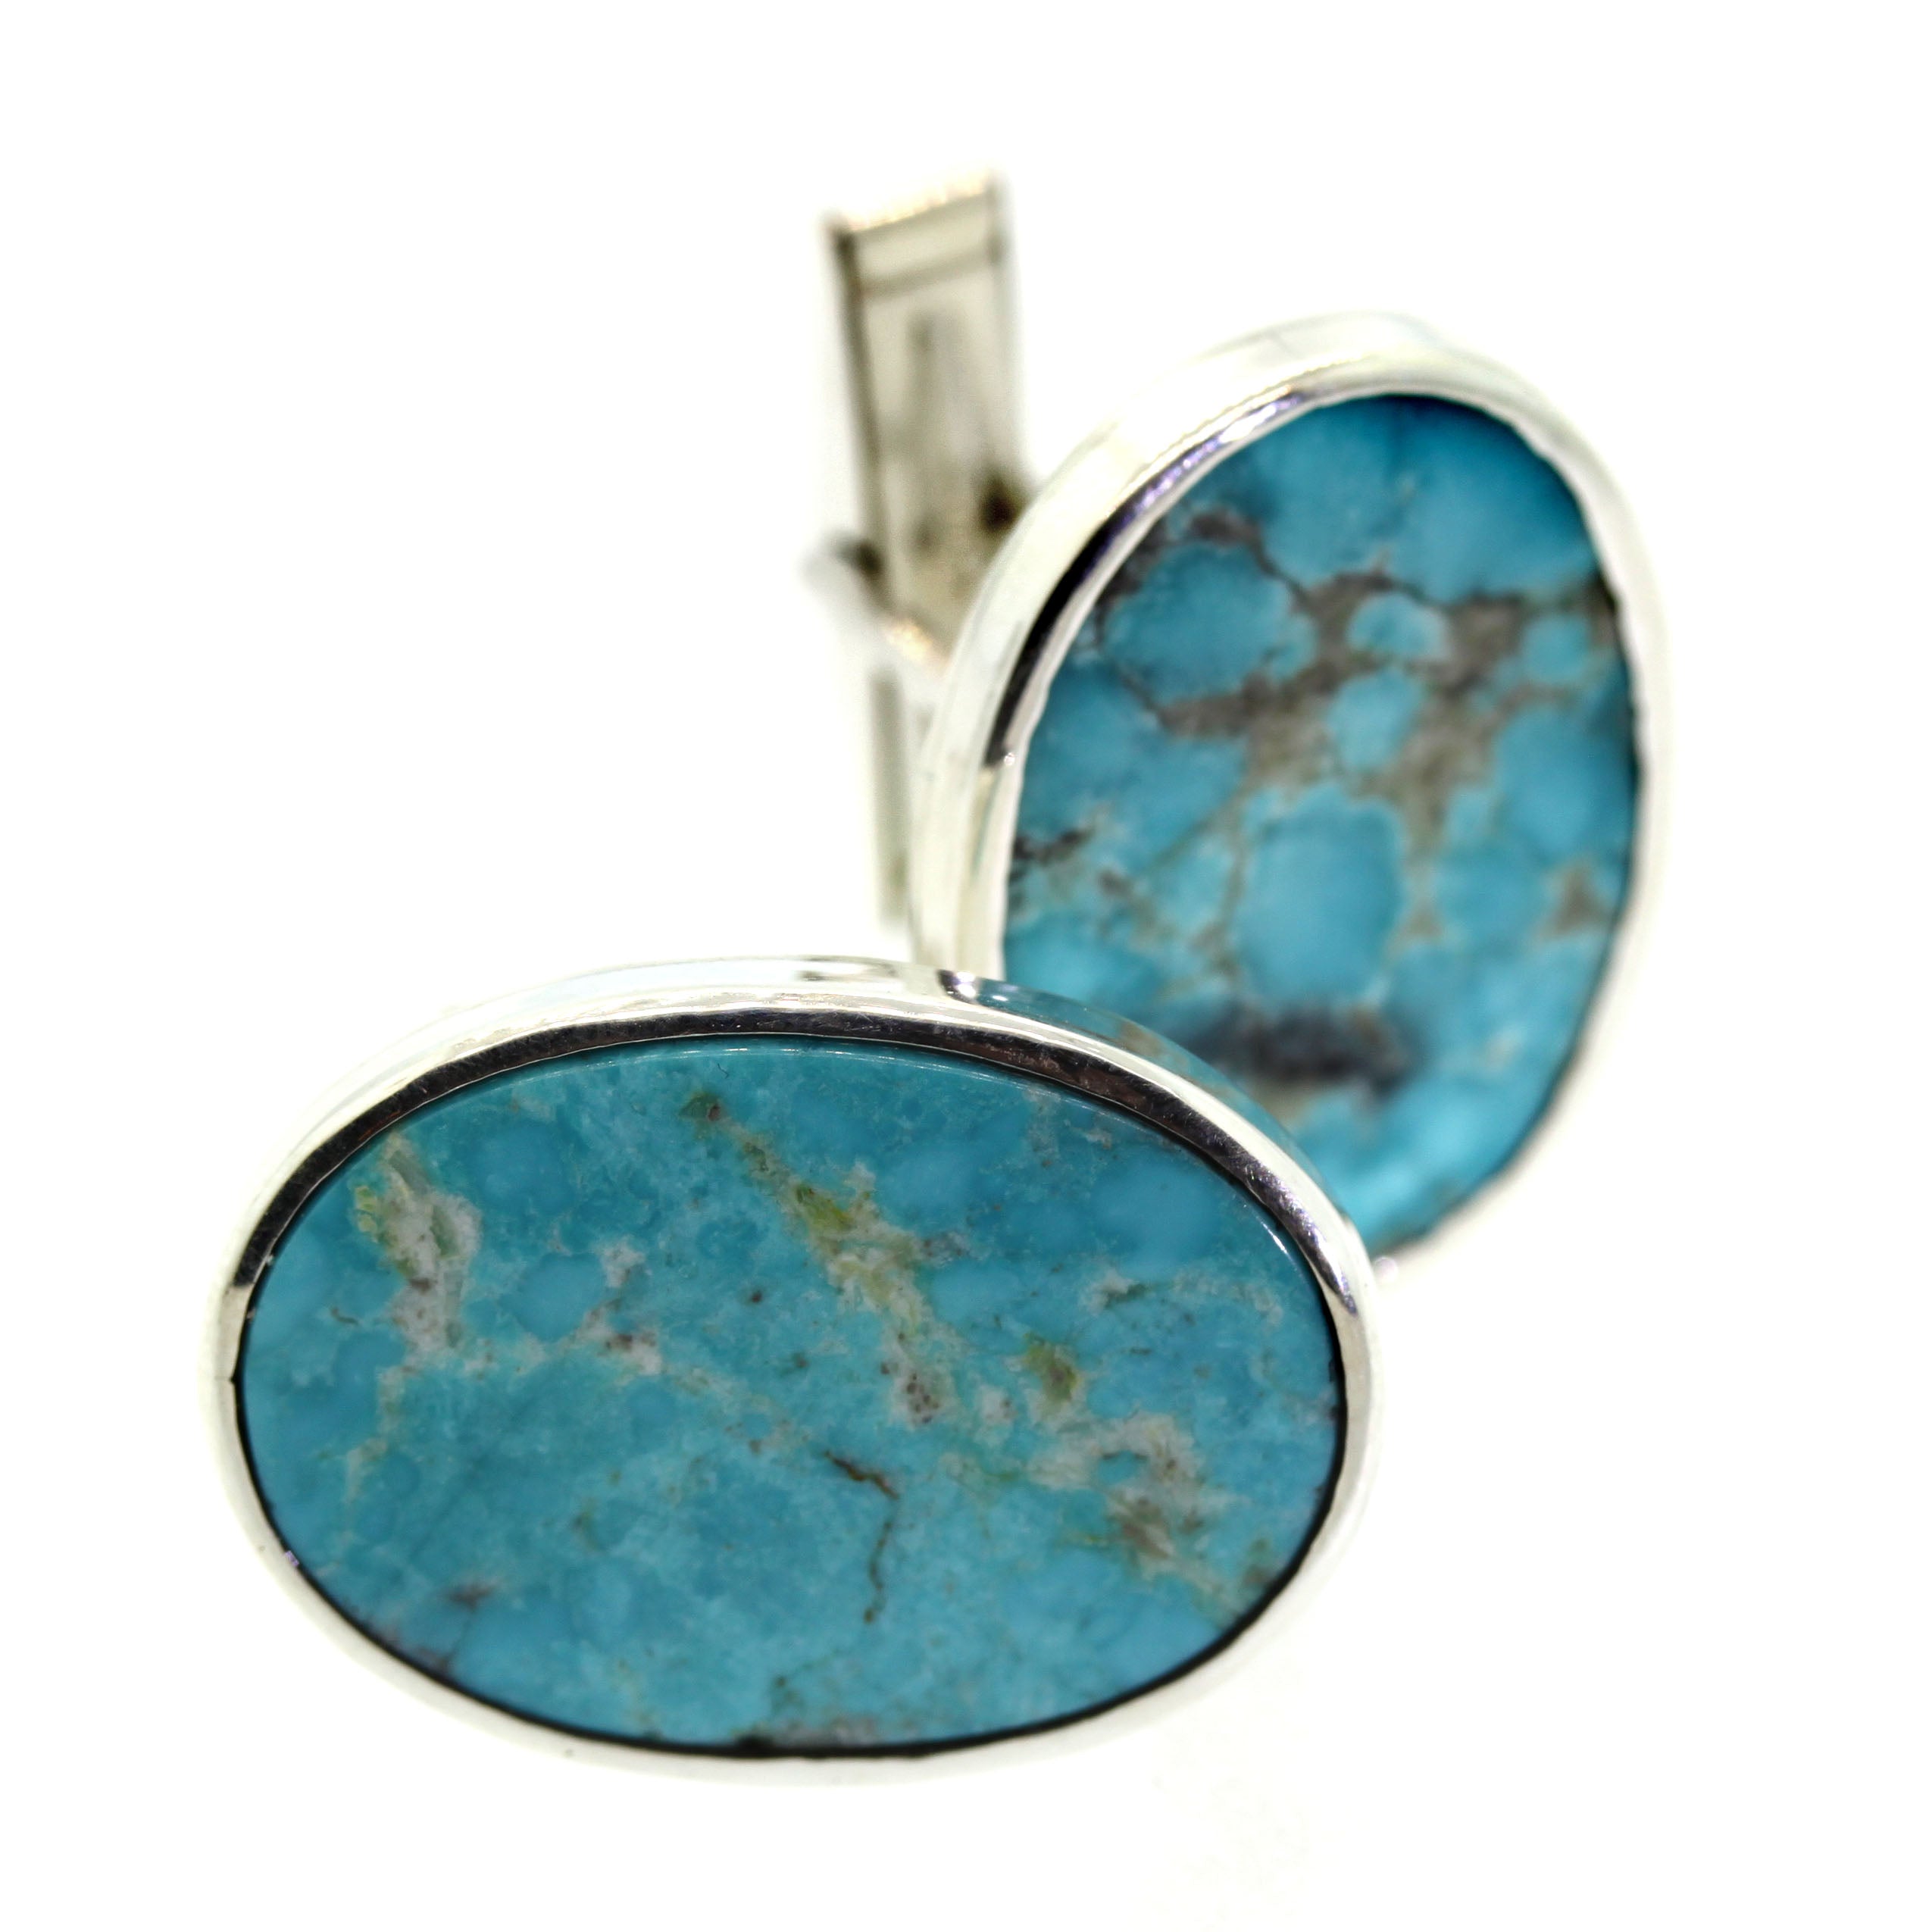 Turquoise Cuff Links - Rebecca Lankford Designs - Houston, TX